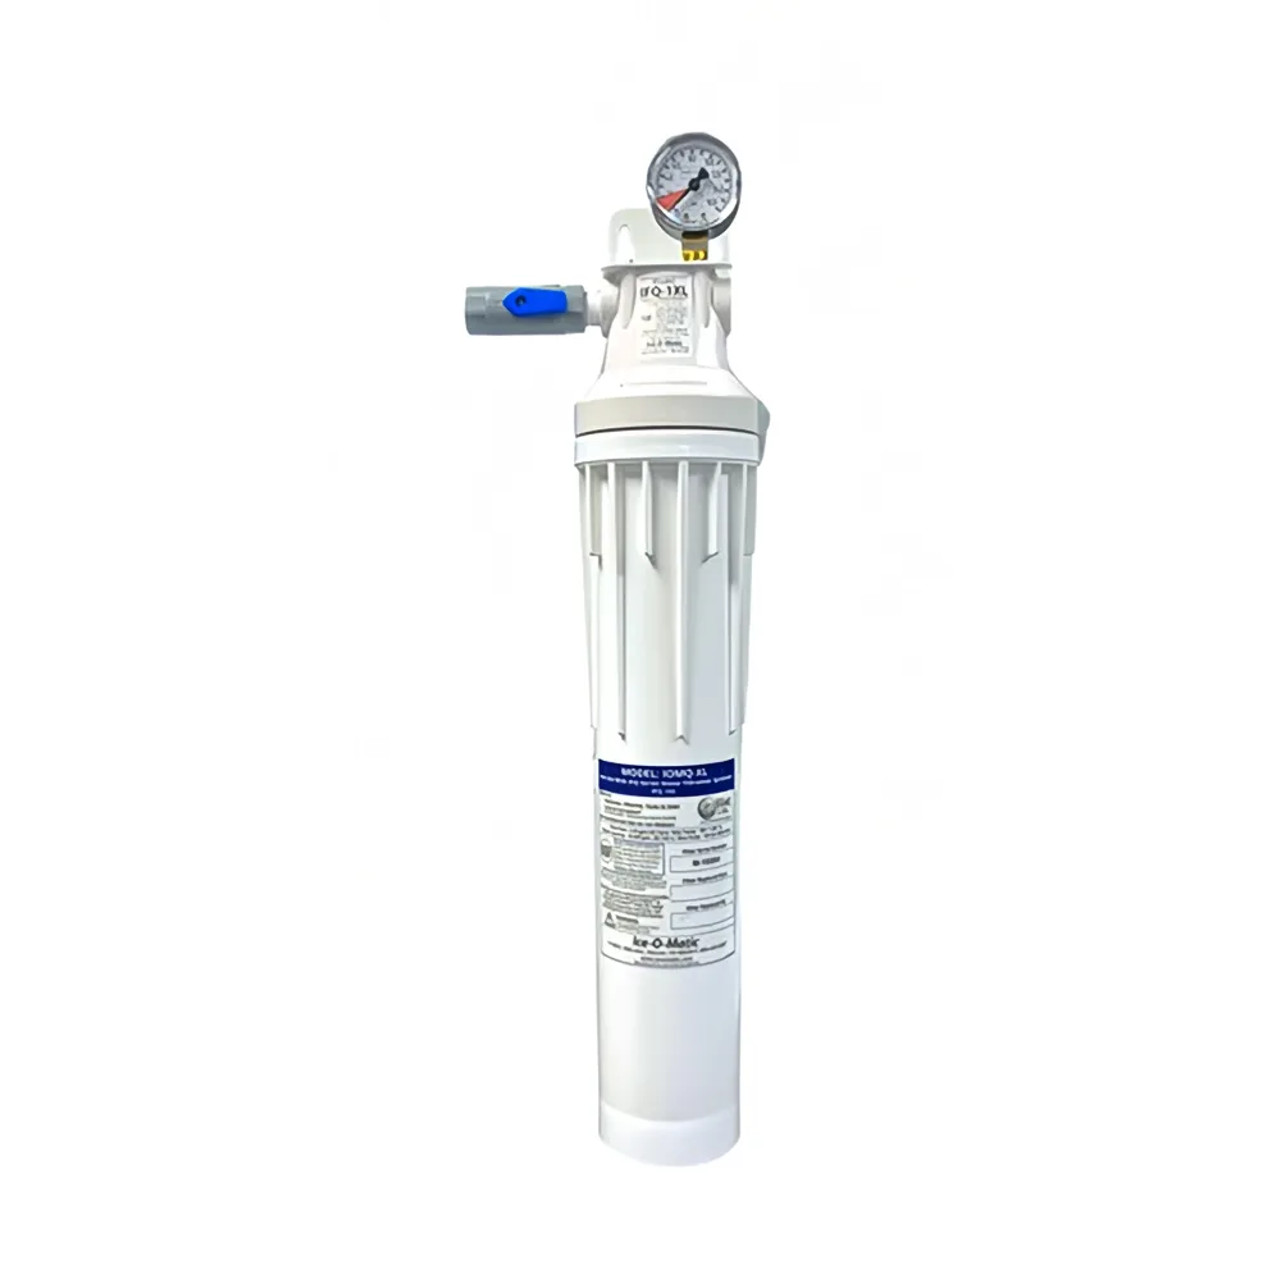 Ice-O-Matic IFQ1-XL Single Water Filter Manifold for 1,000 lb/24 hr Ice Machines - Chicken Pieces